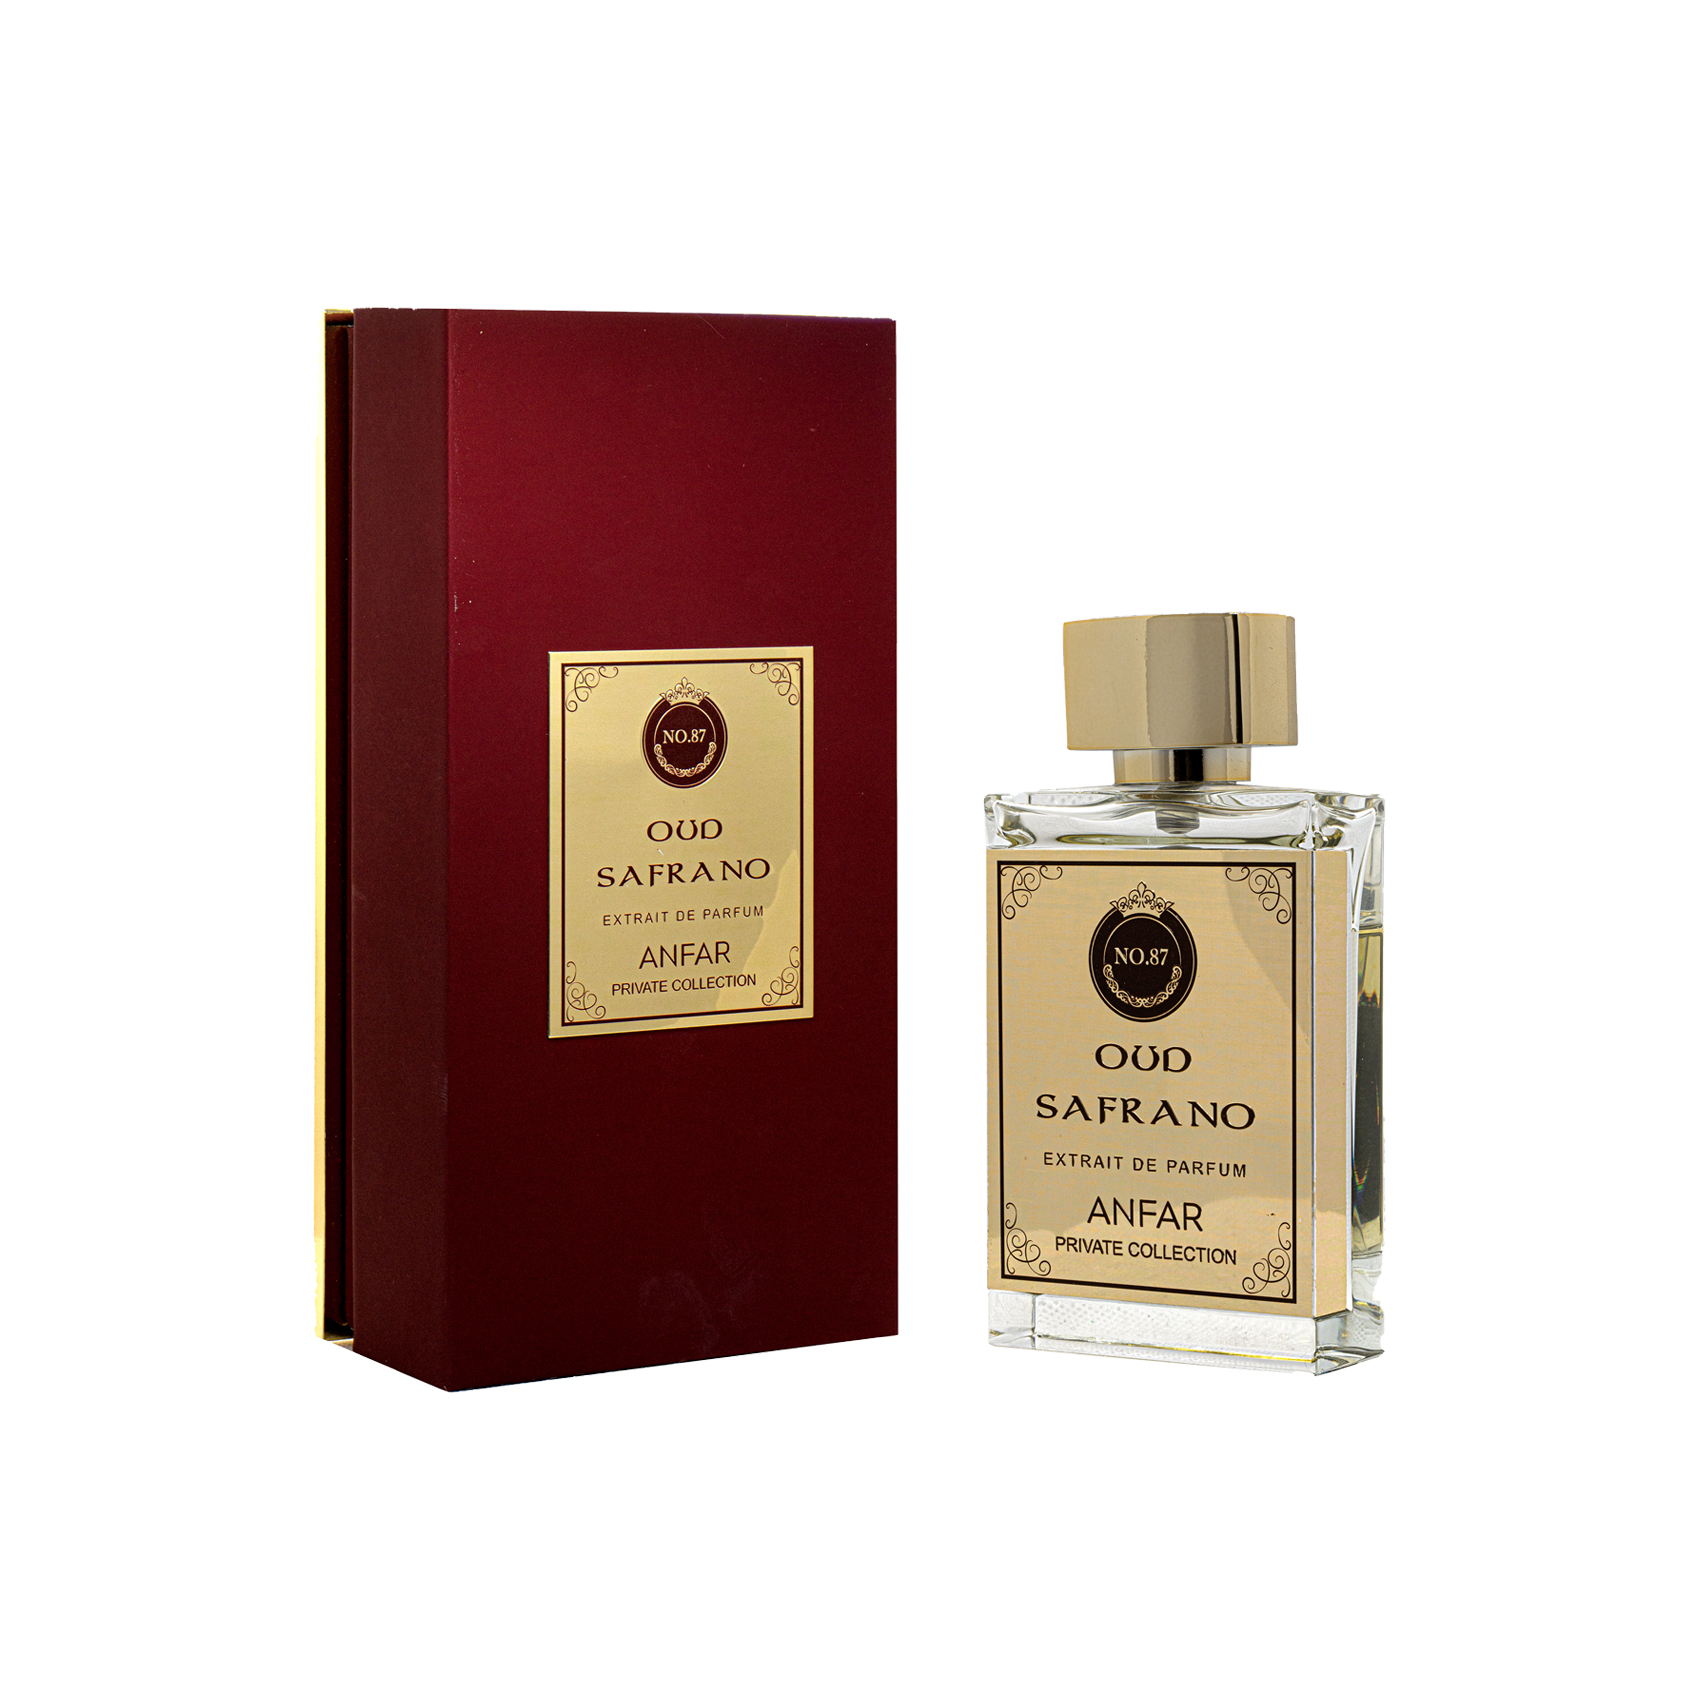 Oud Safrano Private Collection Edp 50 ml Perfume for Men & Women By Anfar London